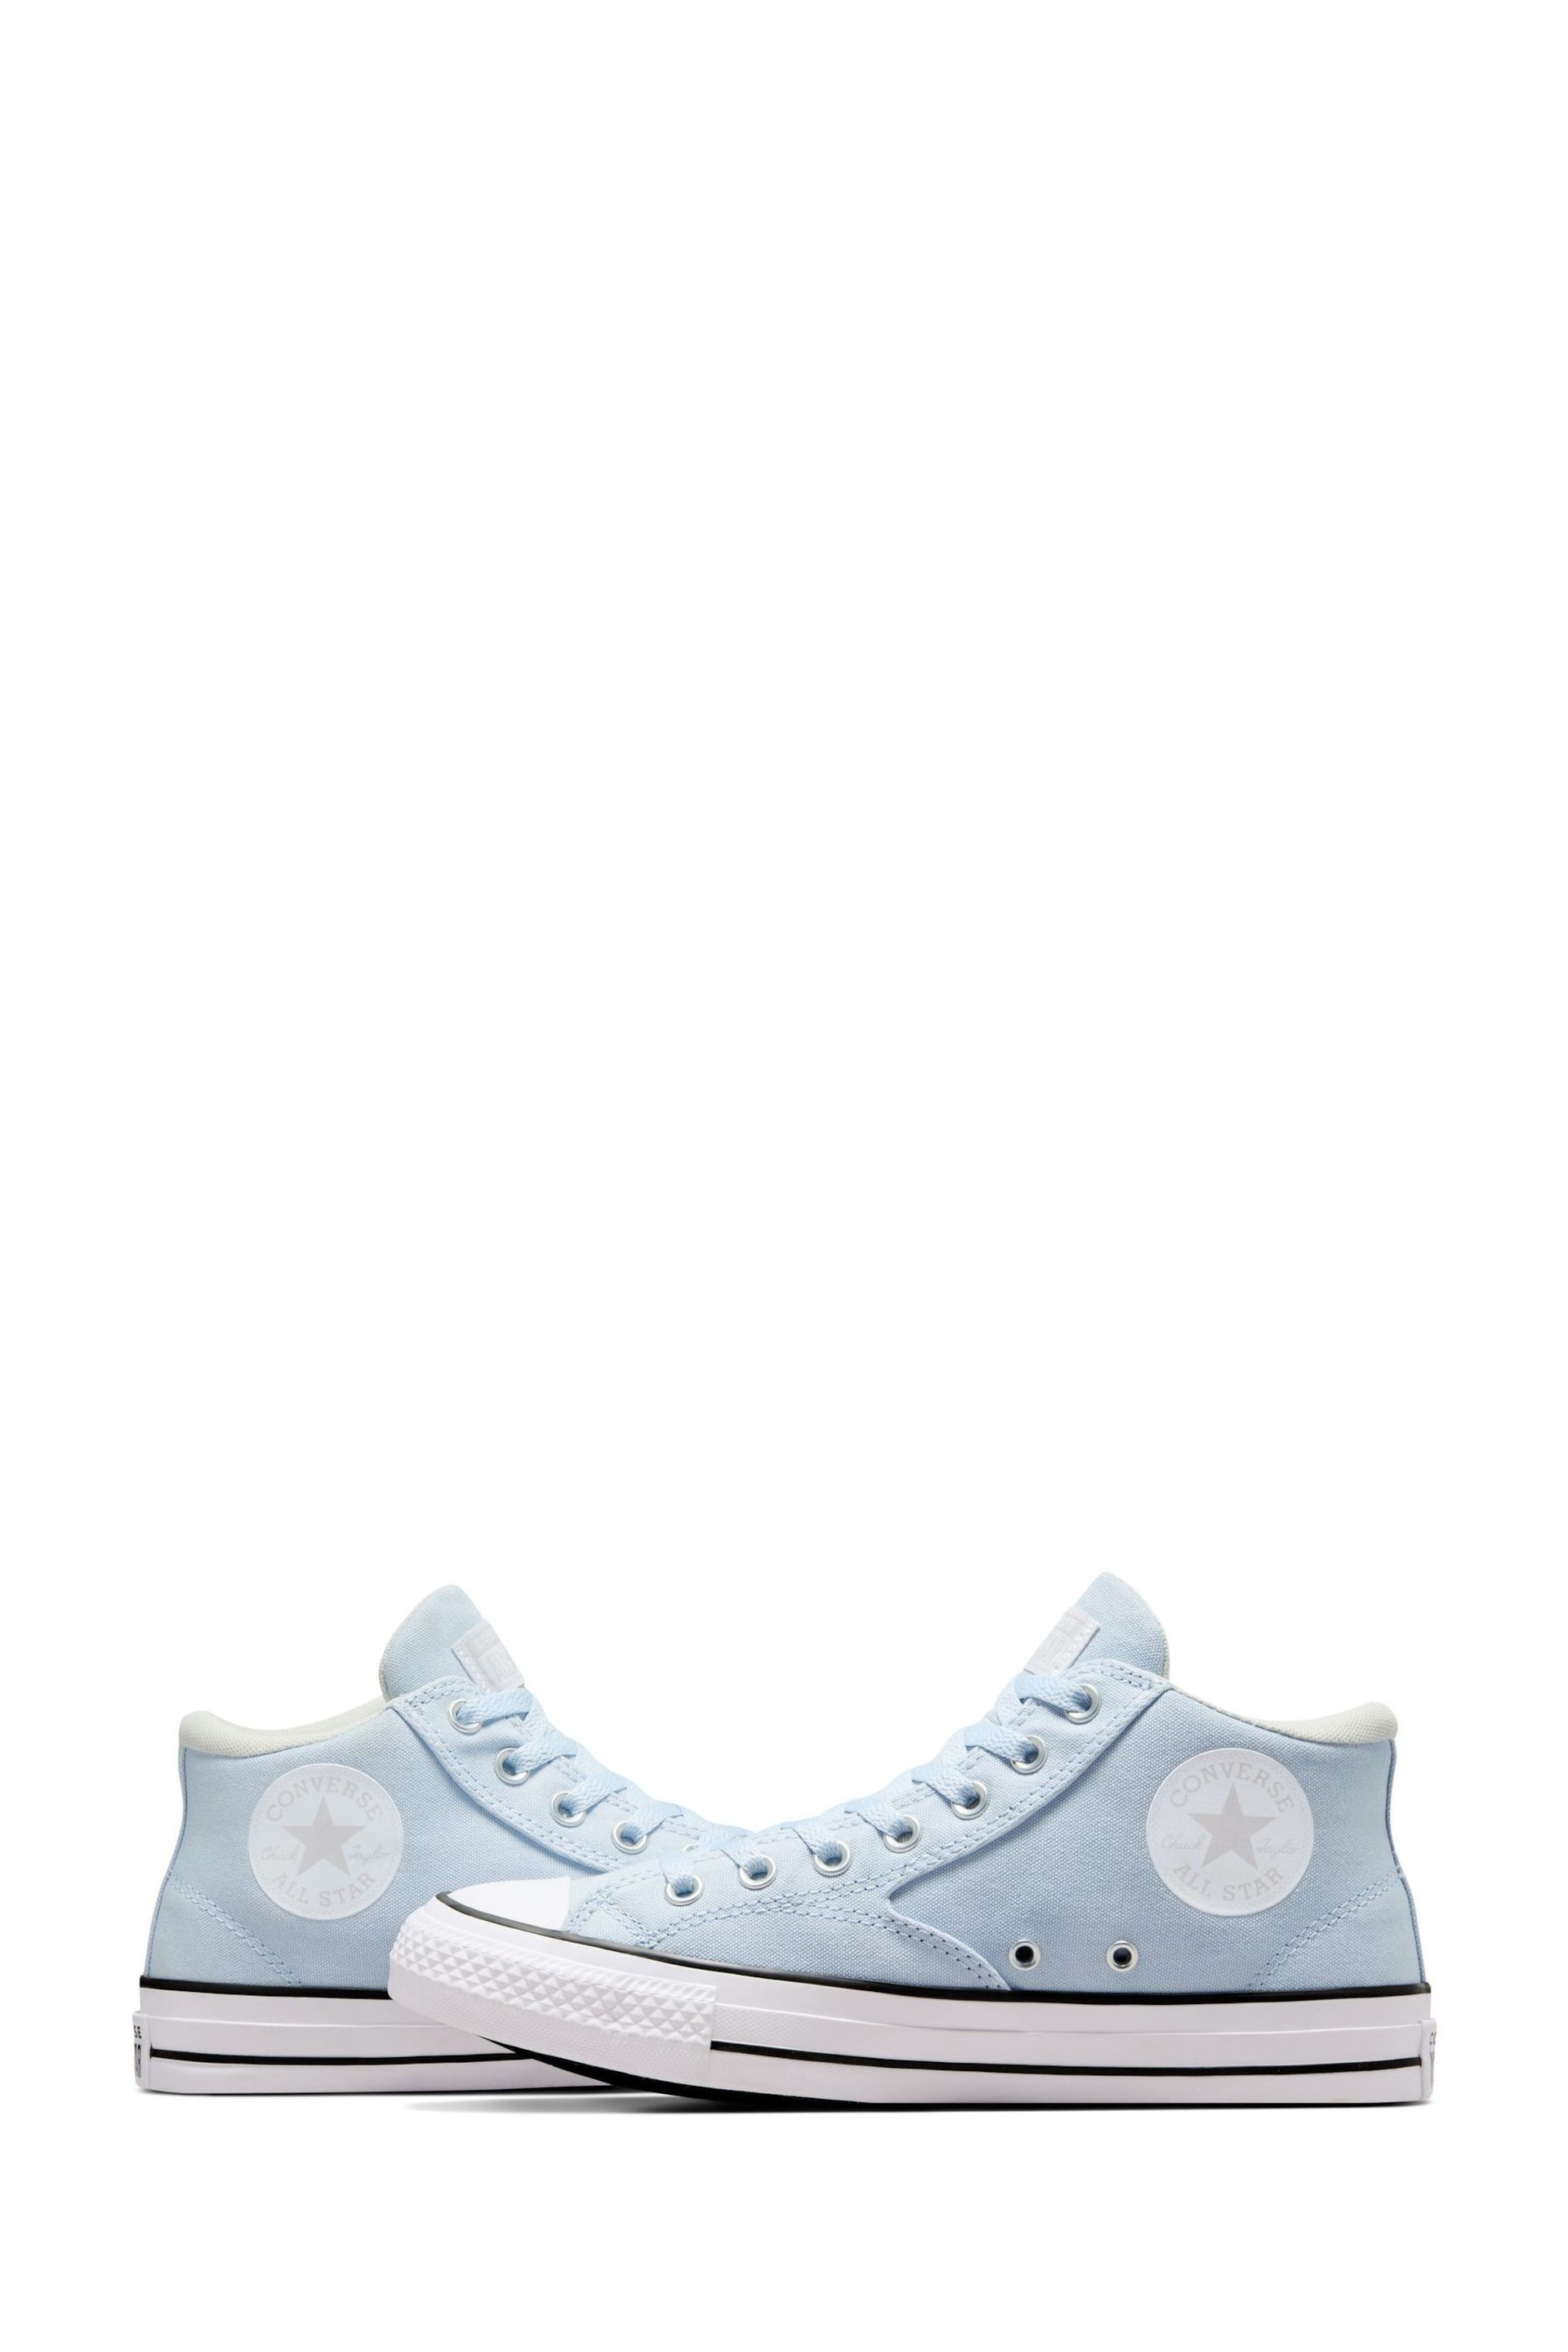 Converse Blue Chuck Taylor All Star Malden Street Trainers - Image 11 of 15